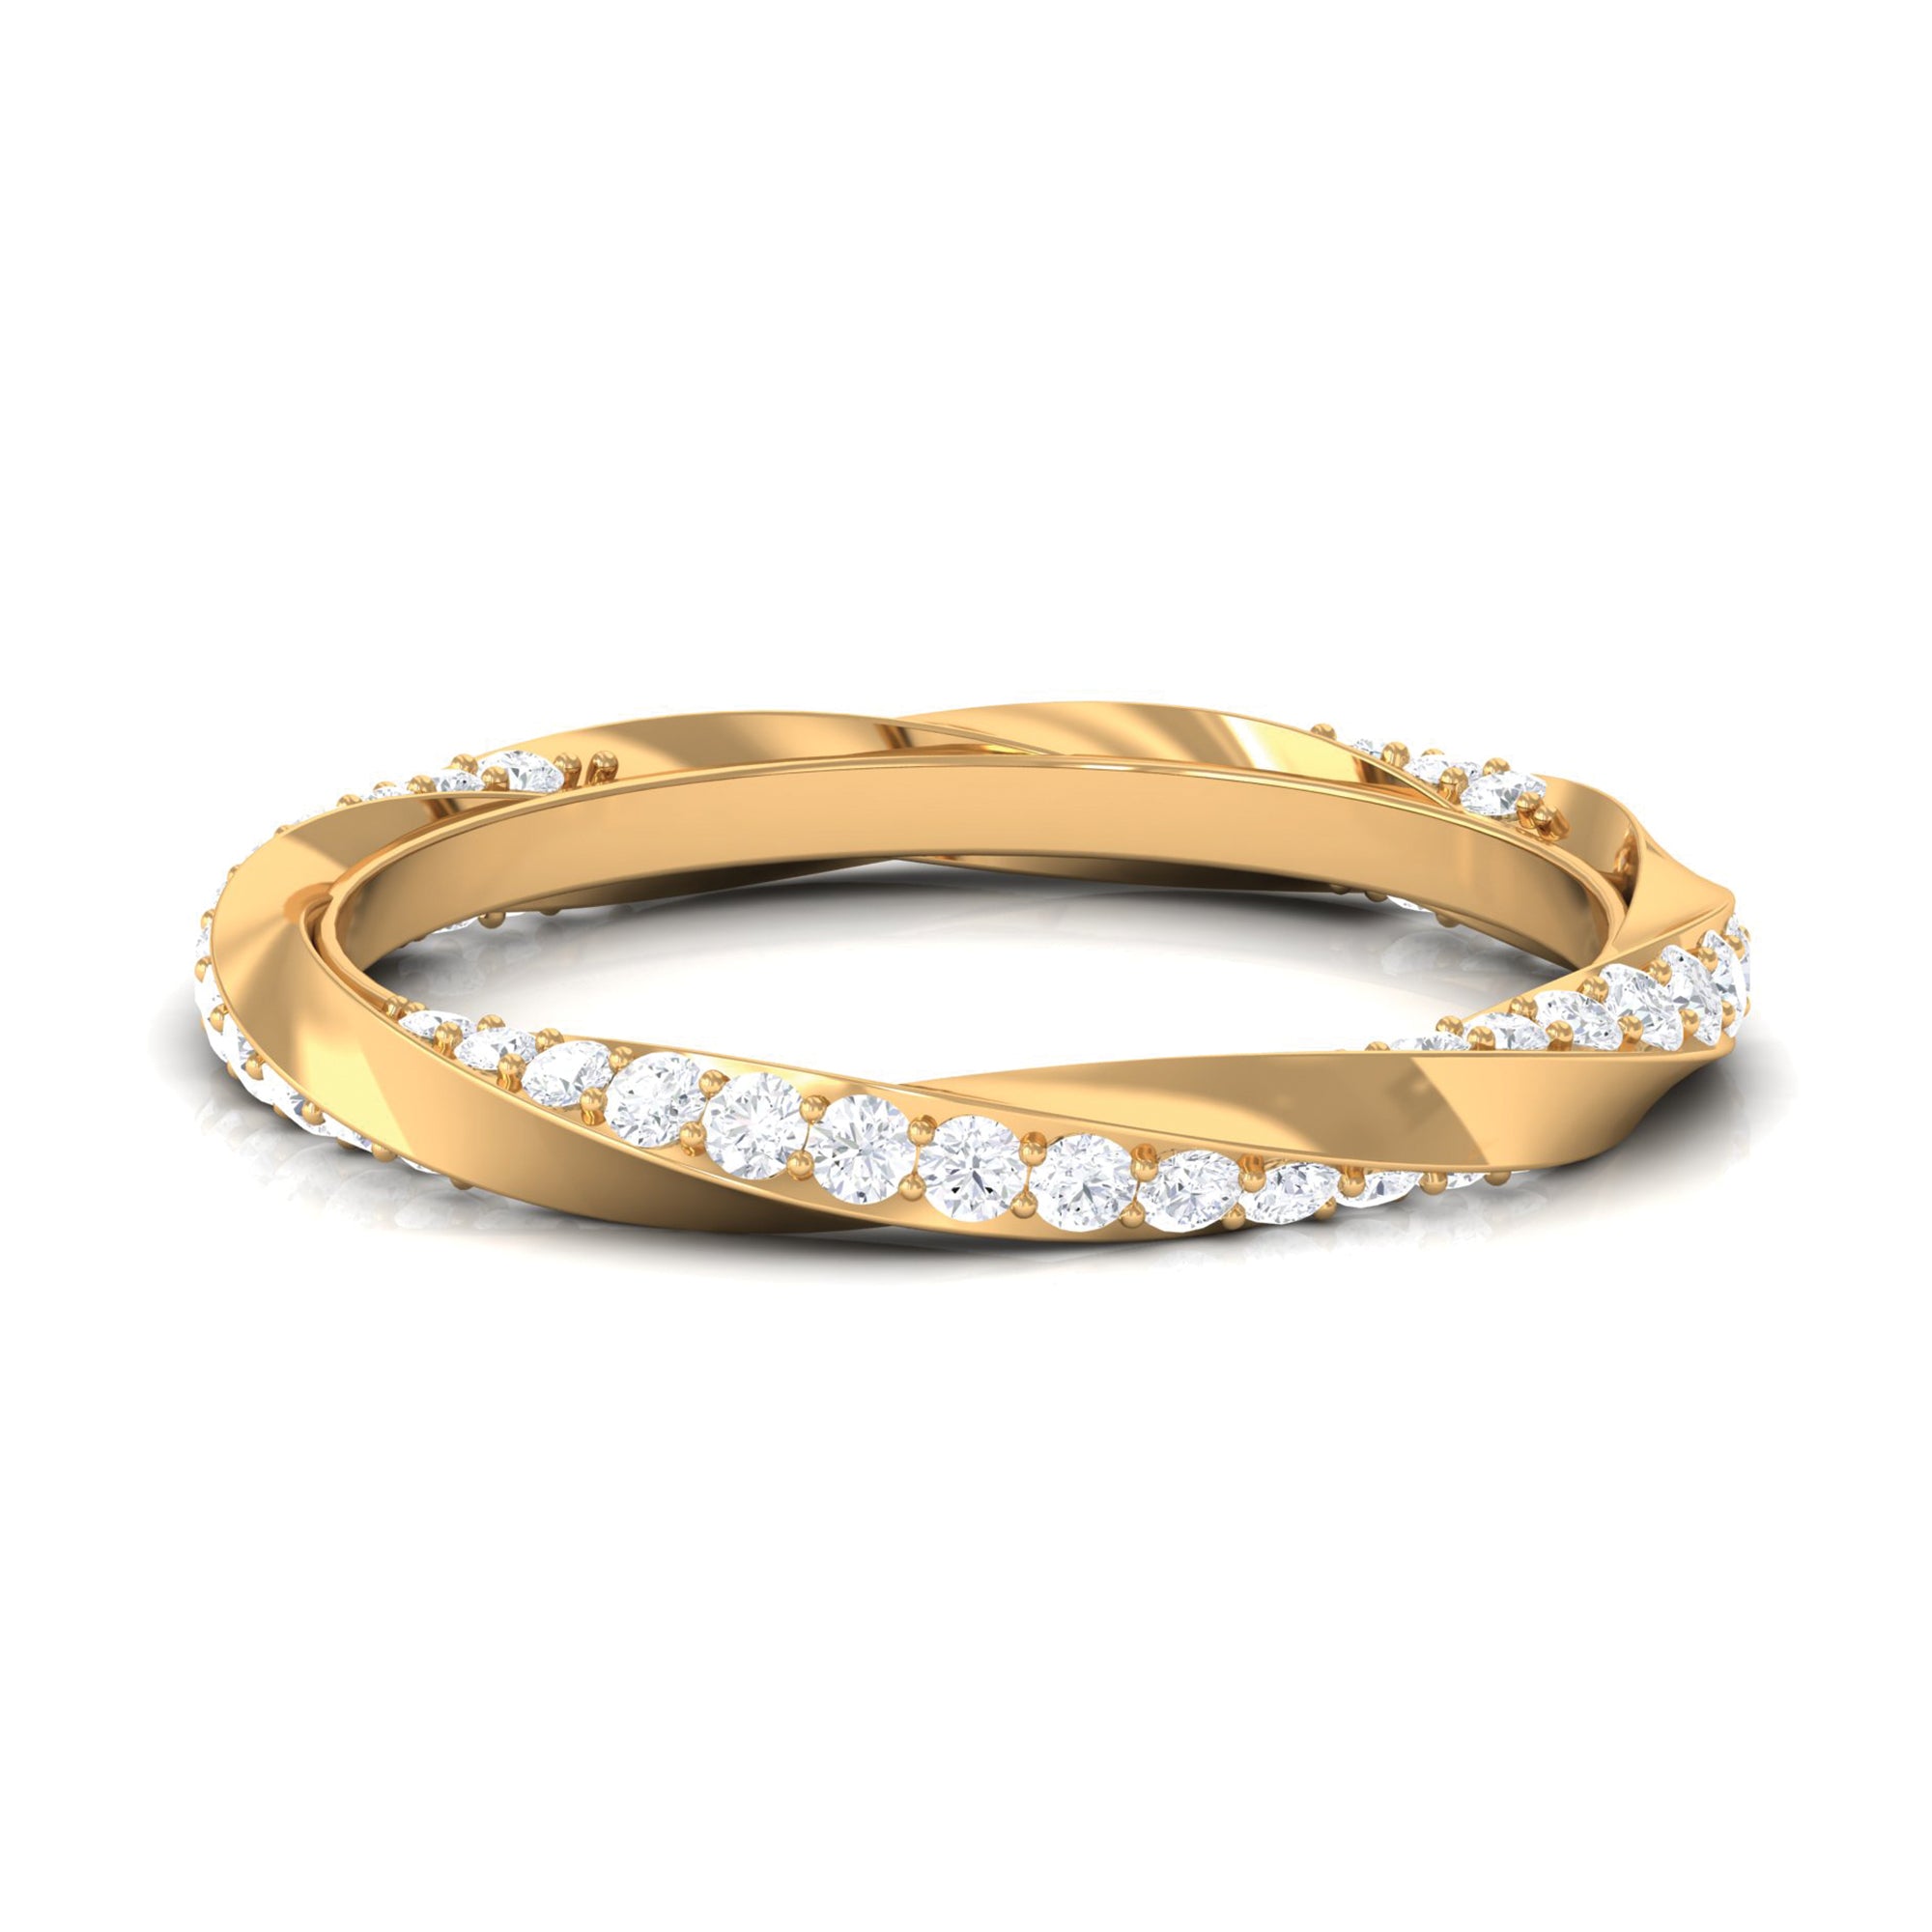 Pave Set Diamond Stackable Ring with Twisted Details Diamond - ( HI-SI ) - Color and Clarity - Rosec Jewels